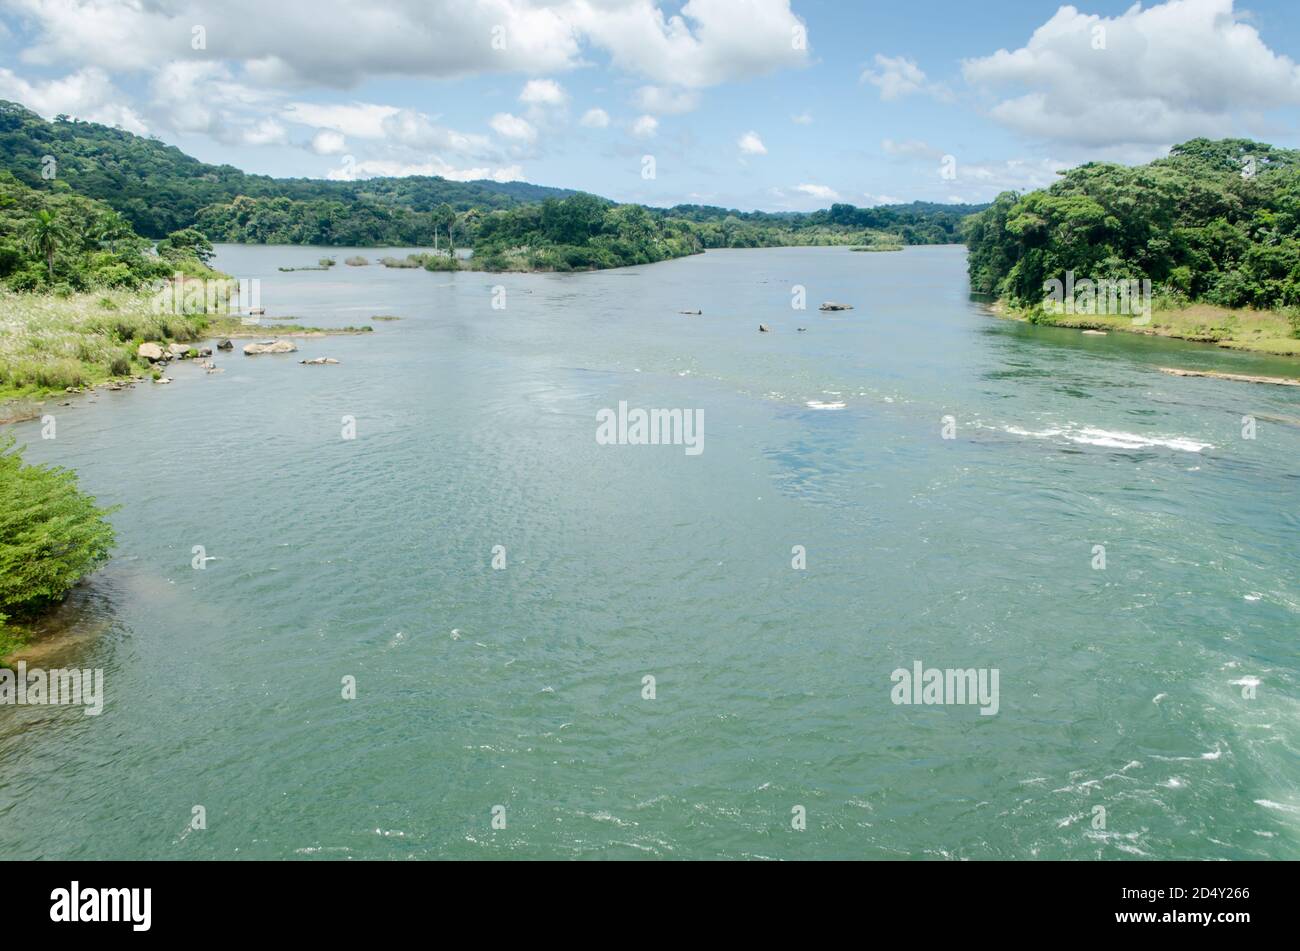 Chagres River as seen from the Chagres Bridge Stock Photo